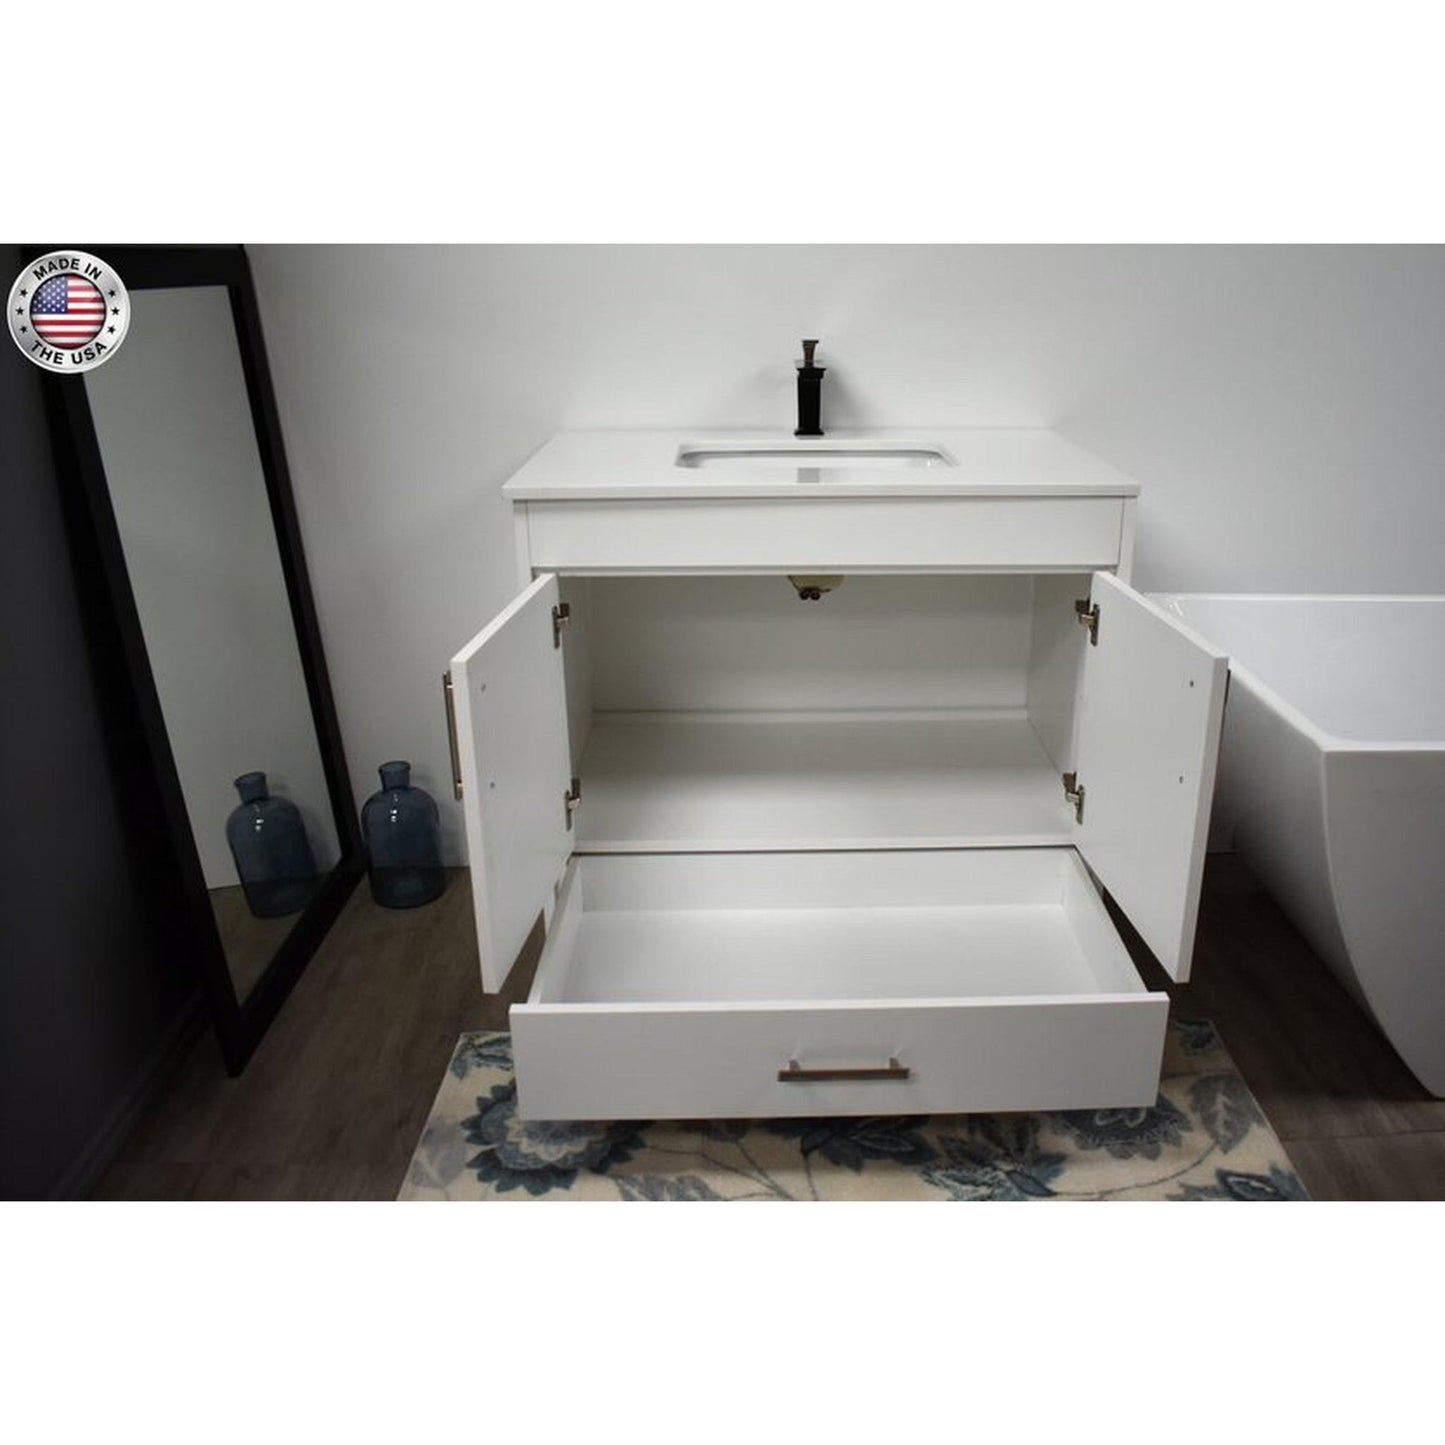 Volpa USA Capri 36" x 22" White Freestanding Modern Bathroom Vanity With Preinstalled Undermount Sink And White Microstone Top With Brushed Nickel Edge Handles